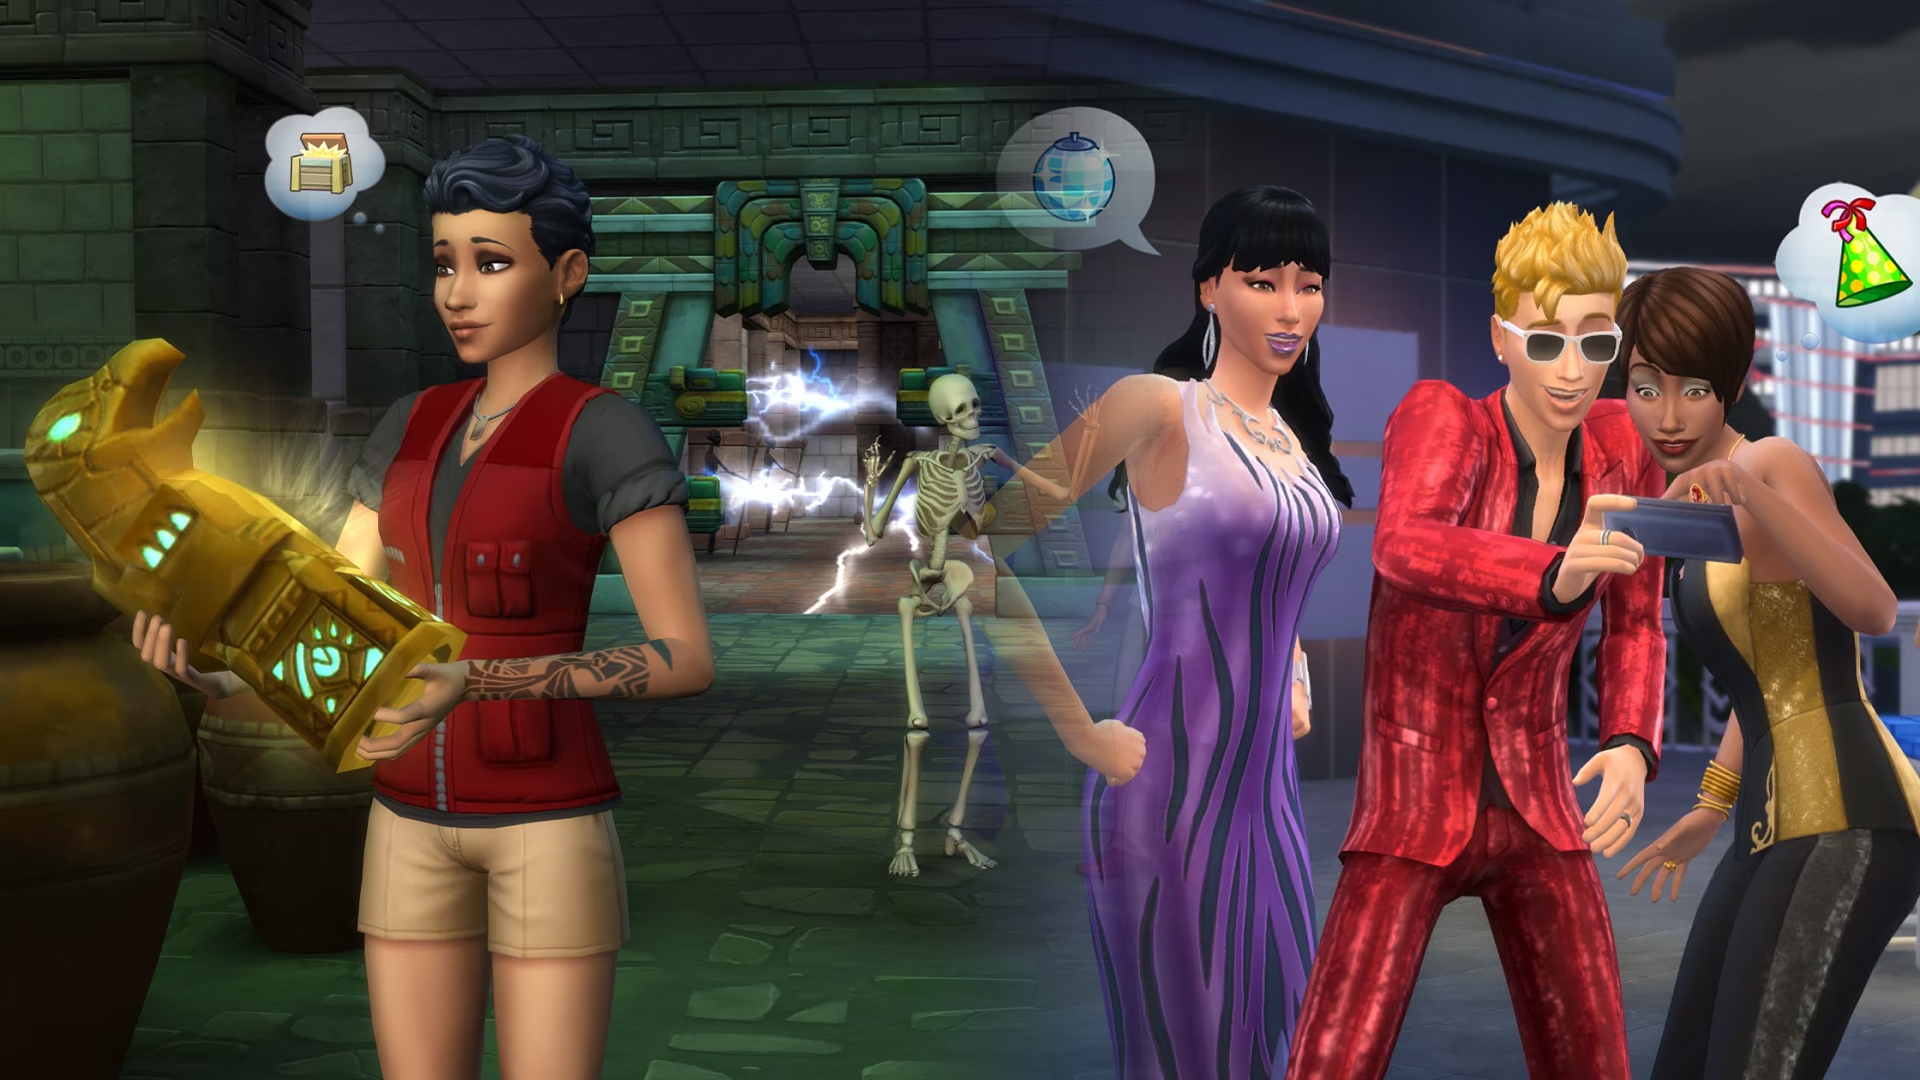 Grab The Sims 4 The Daring Lifestyle Bundle for FREE